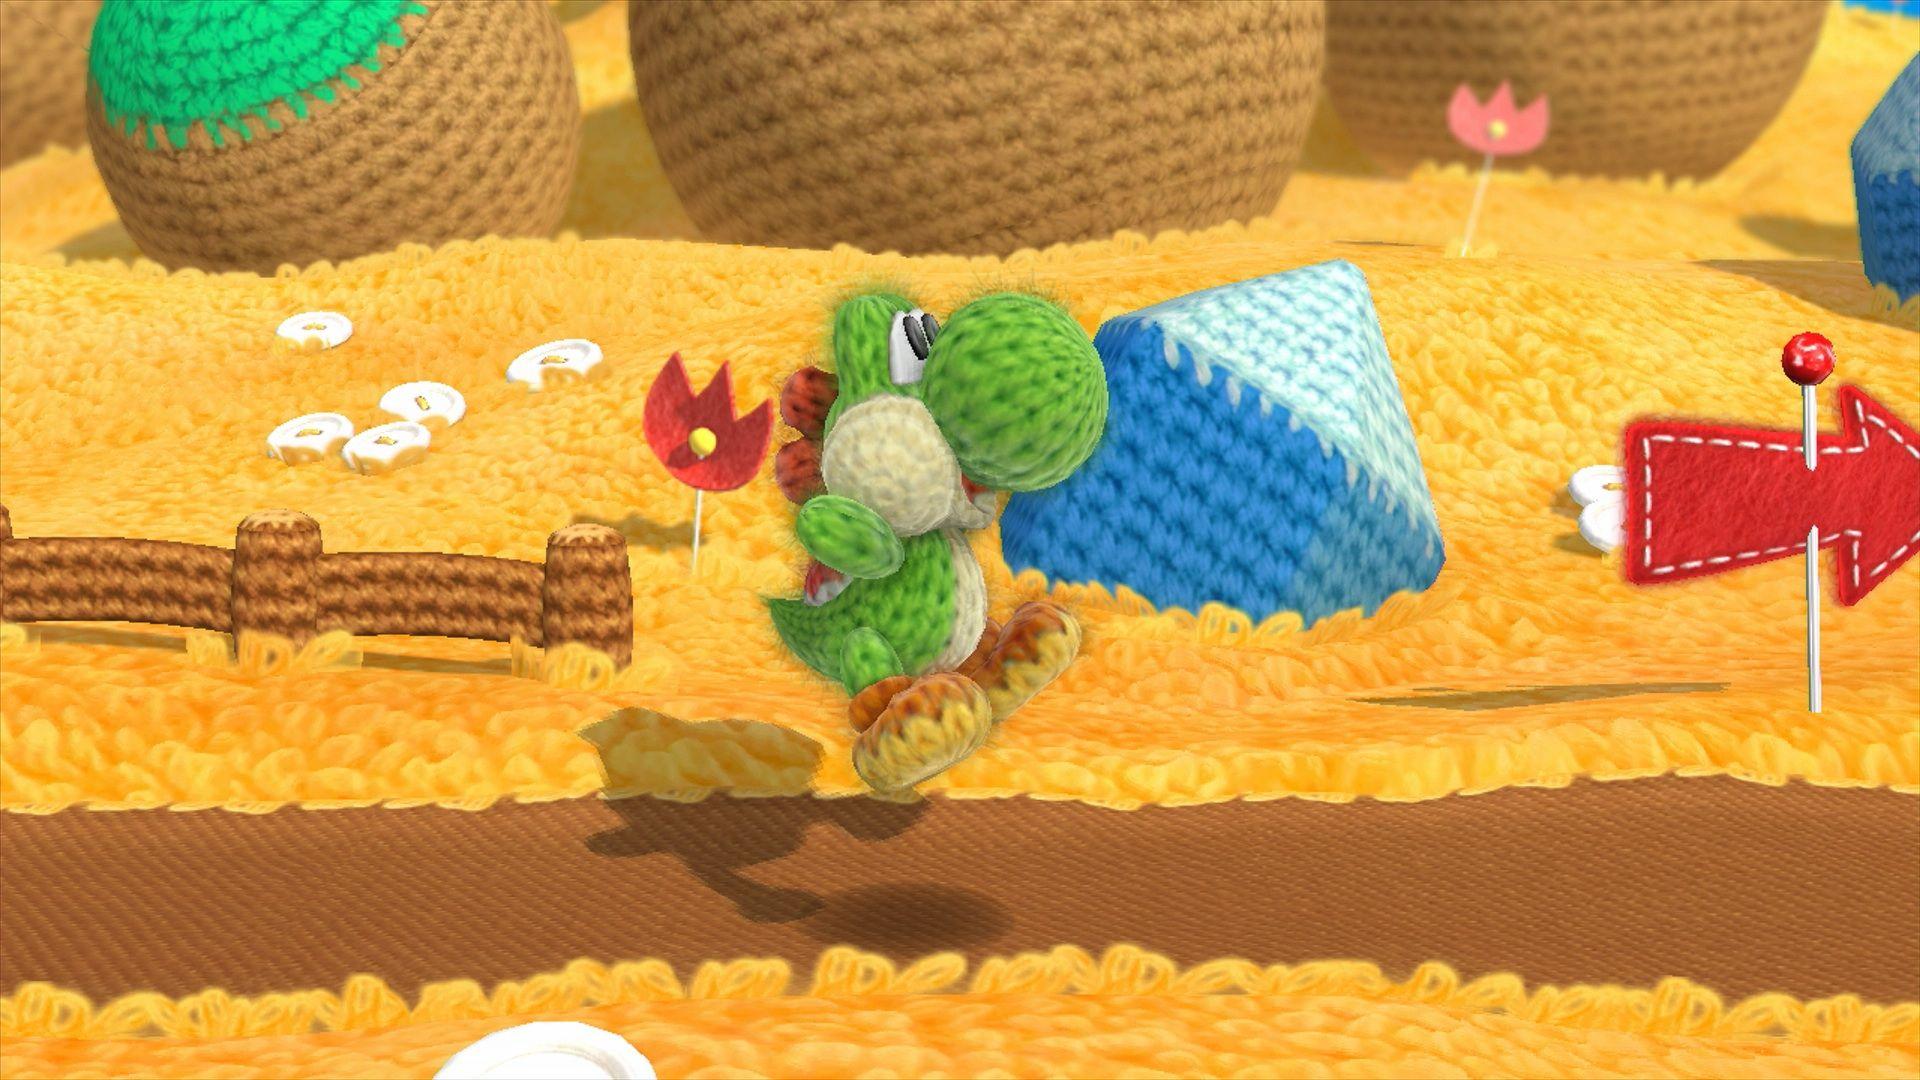 Yoshi's Woolly World' is a light, fluffy reminder of the SNES